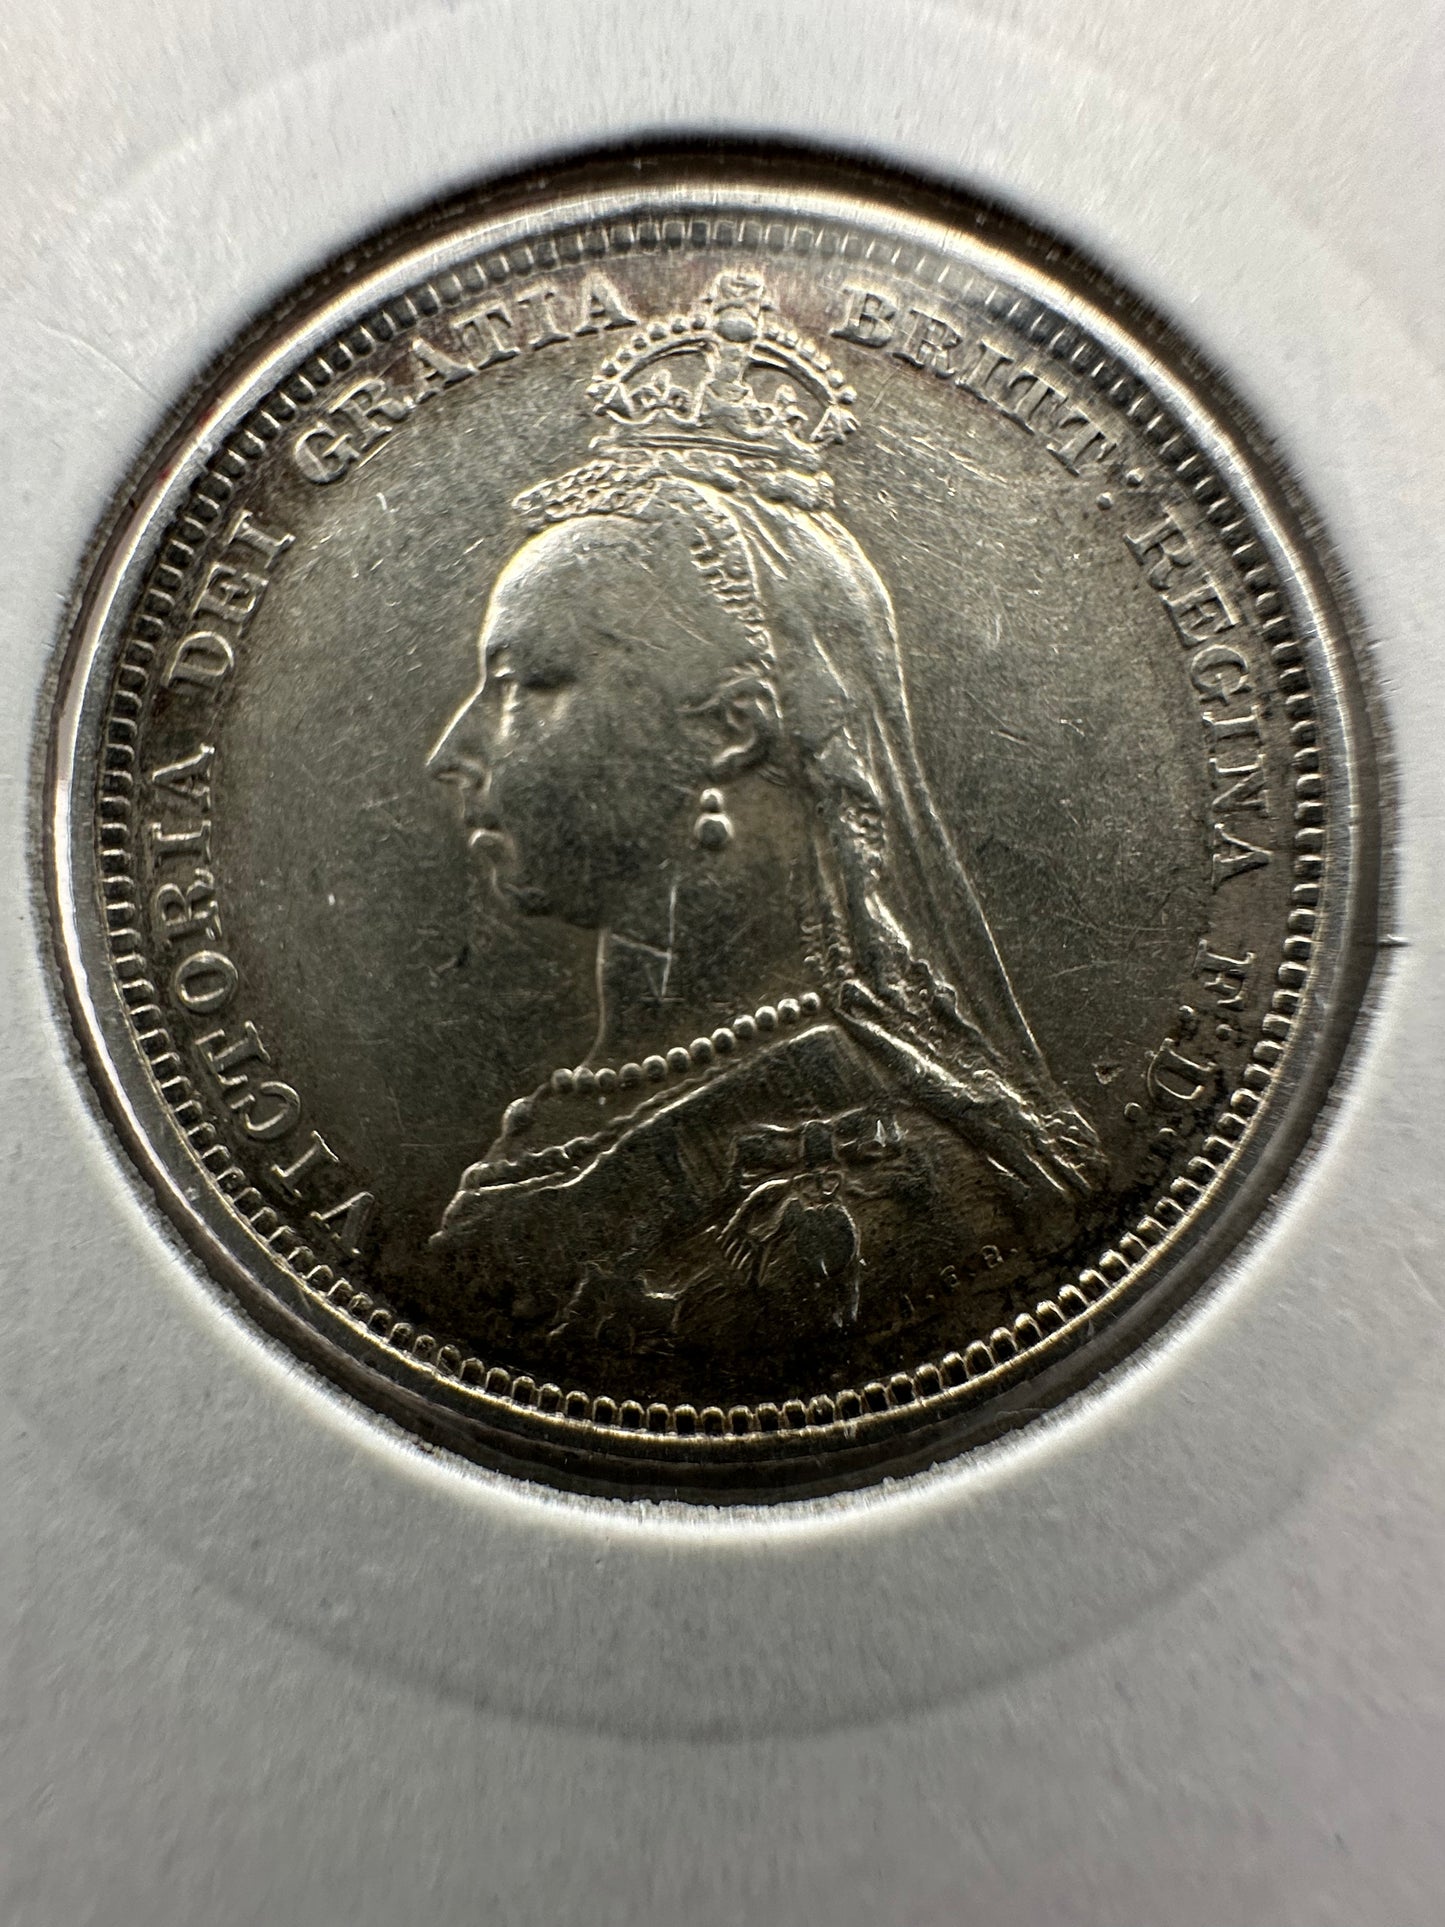 1887 Great Britain UK Queen Victoria Sixpence, Jubilee issue, JEB on truncation, extremely rare - .925 Silver